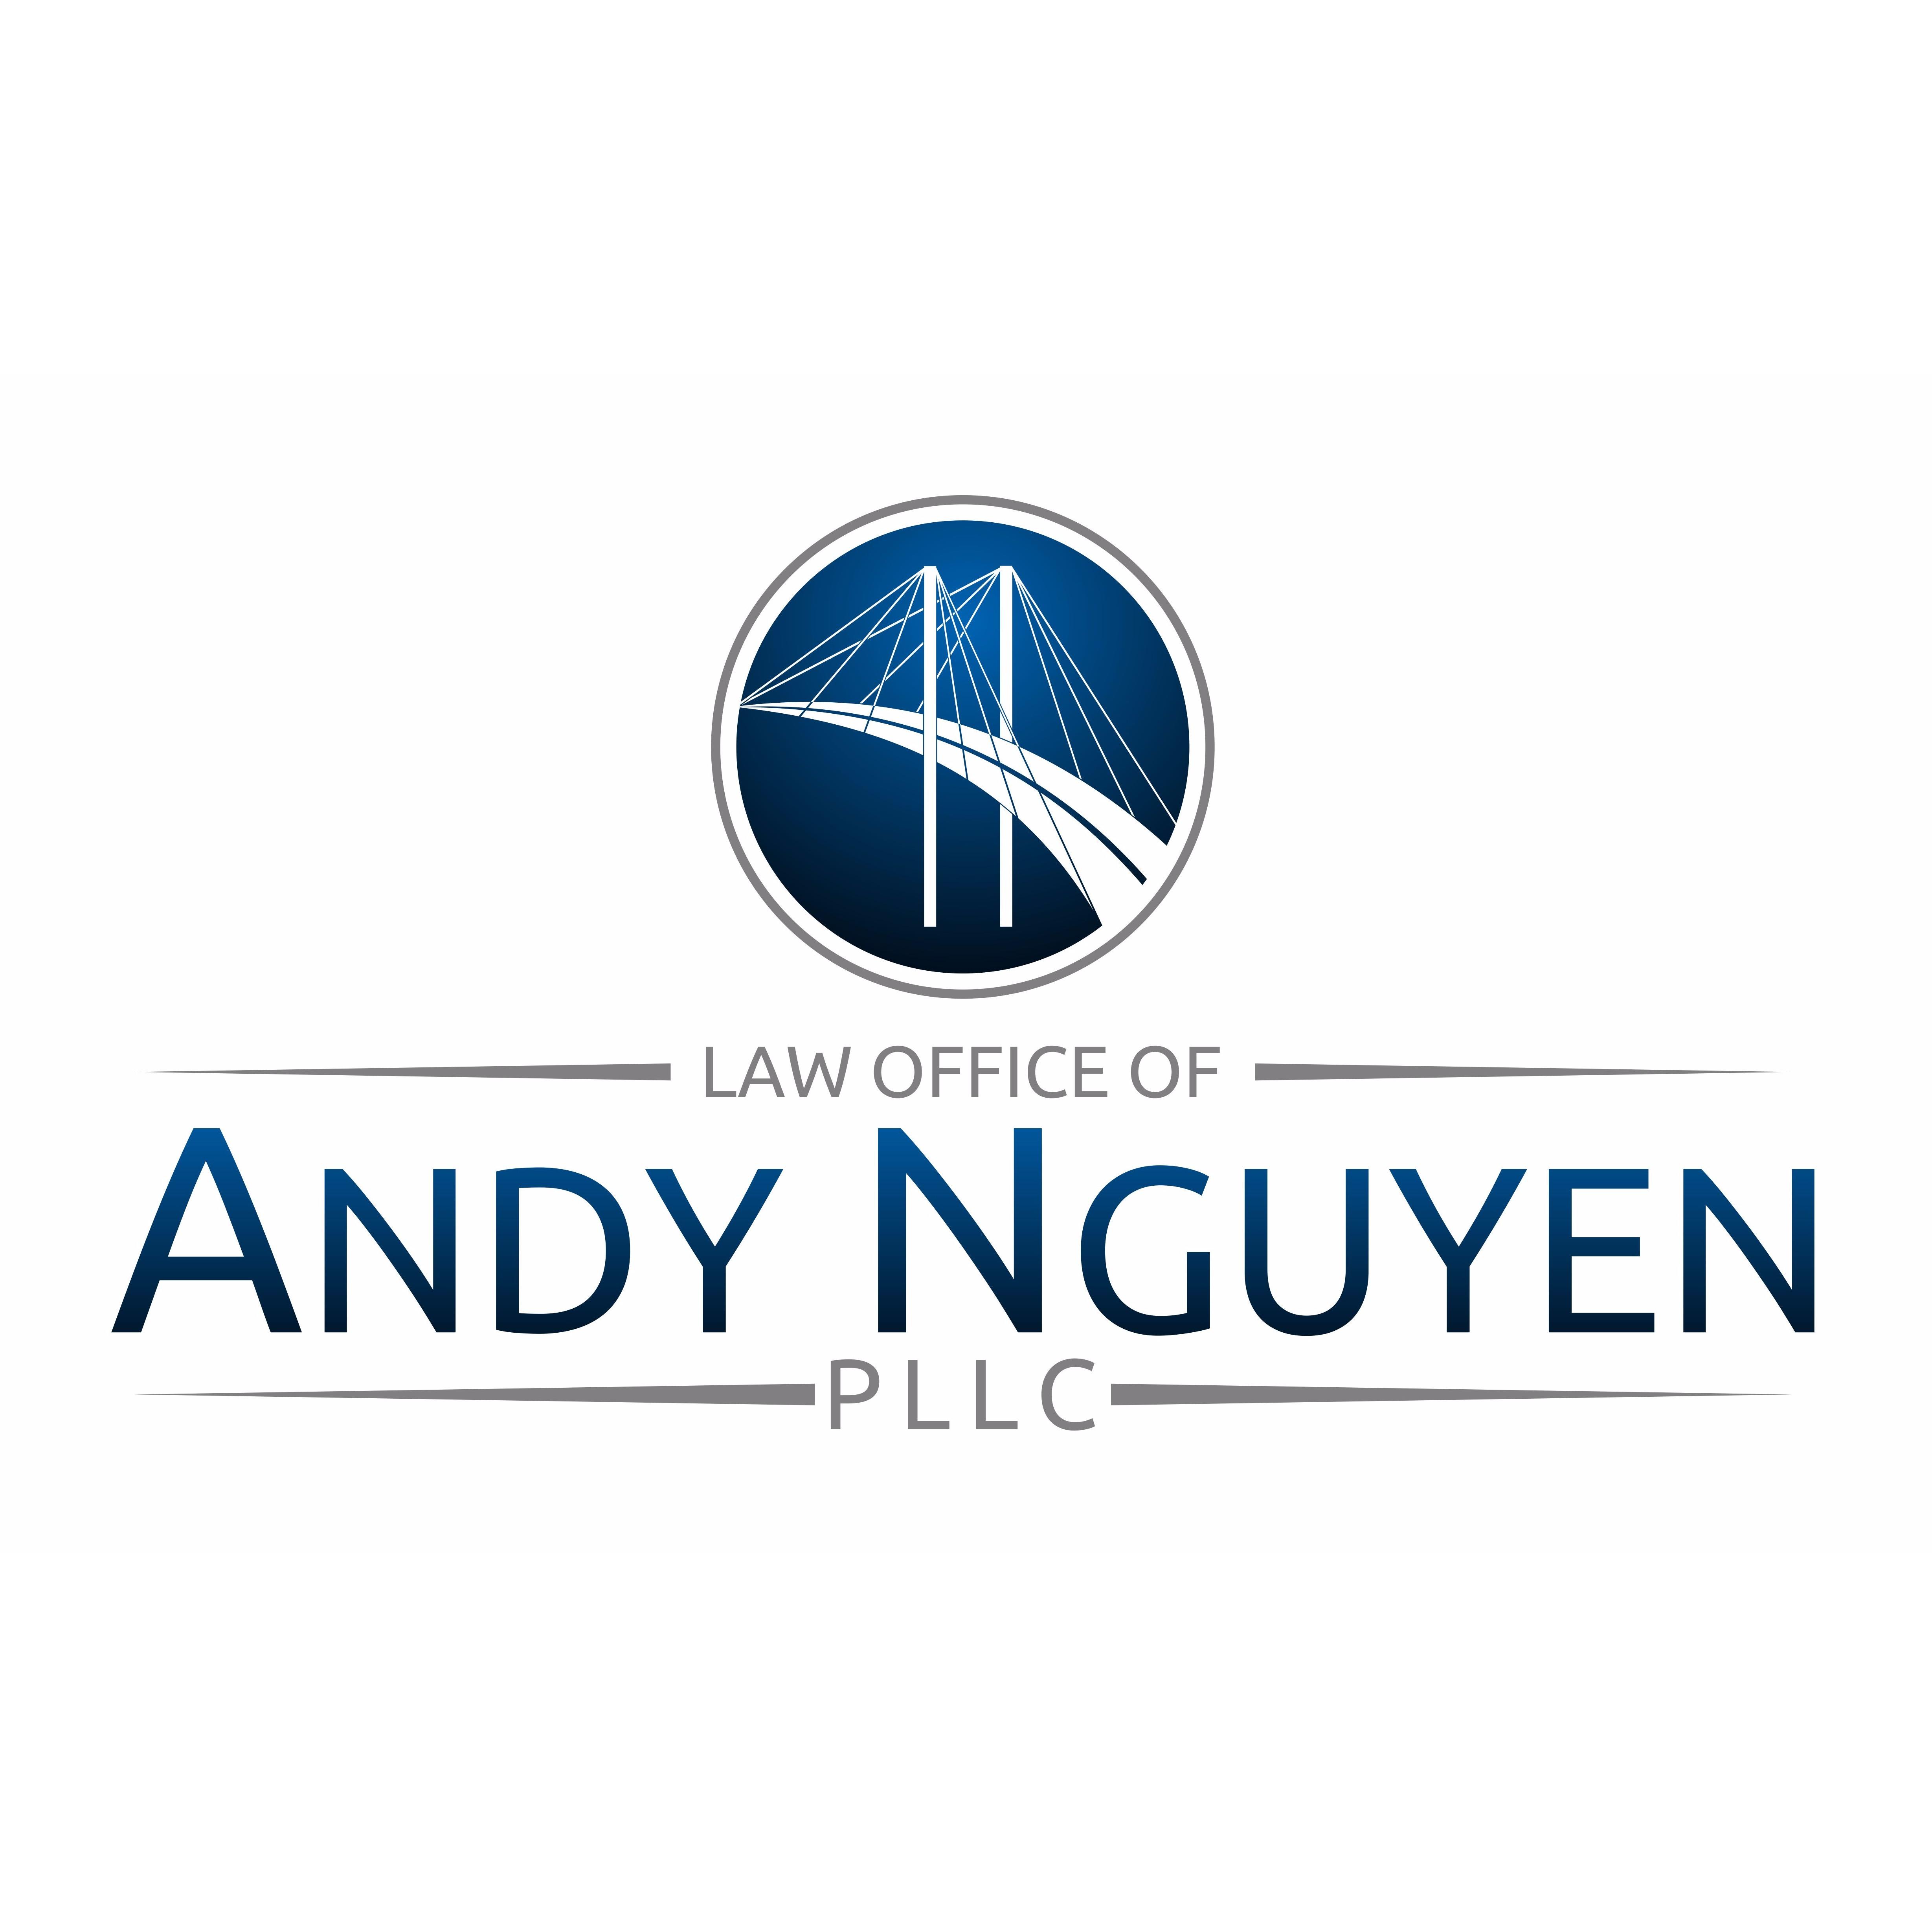 Law Office of Andy Nguyen, PLLC